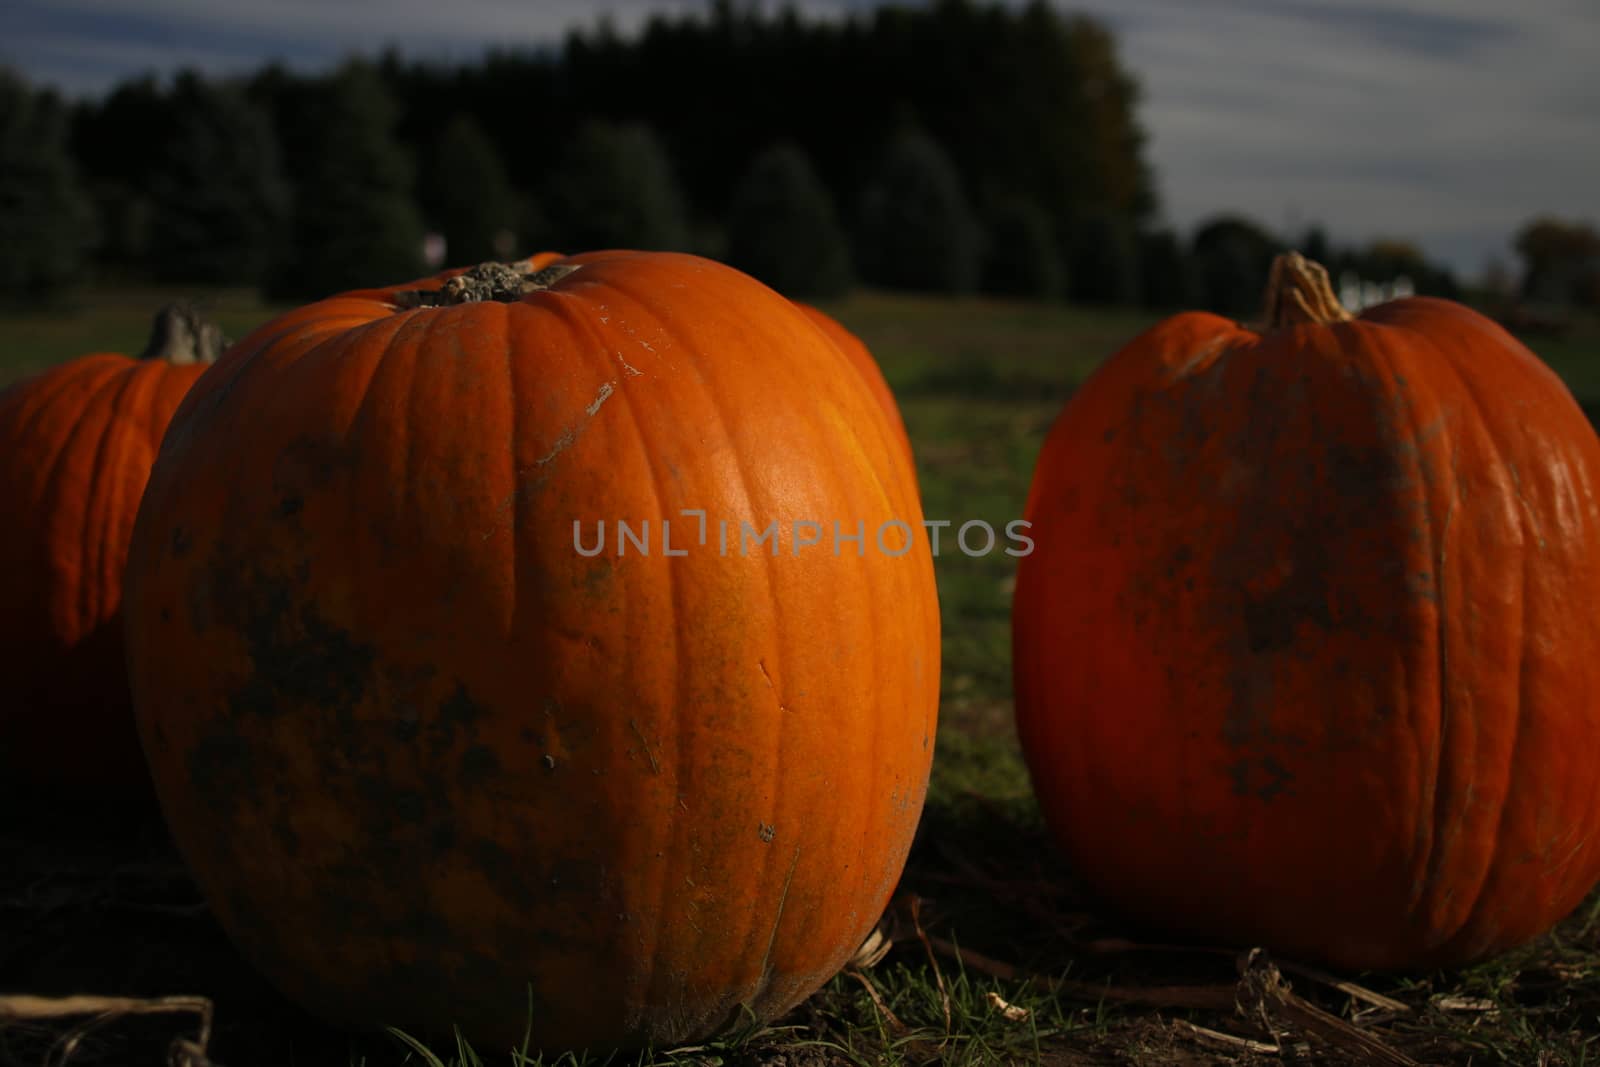 orange pumpkins at outdoor farmer market. pumpkin patch. Copy space for your text by mynewturtle1